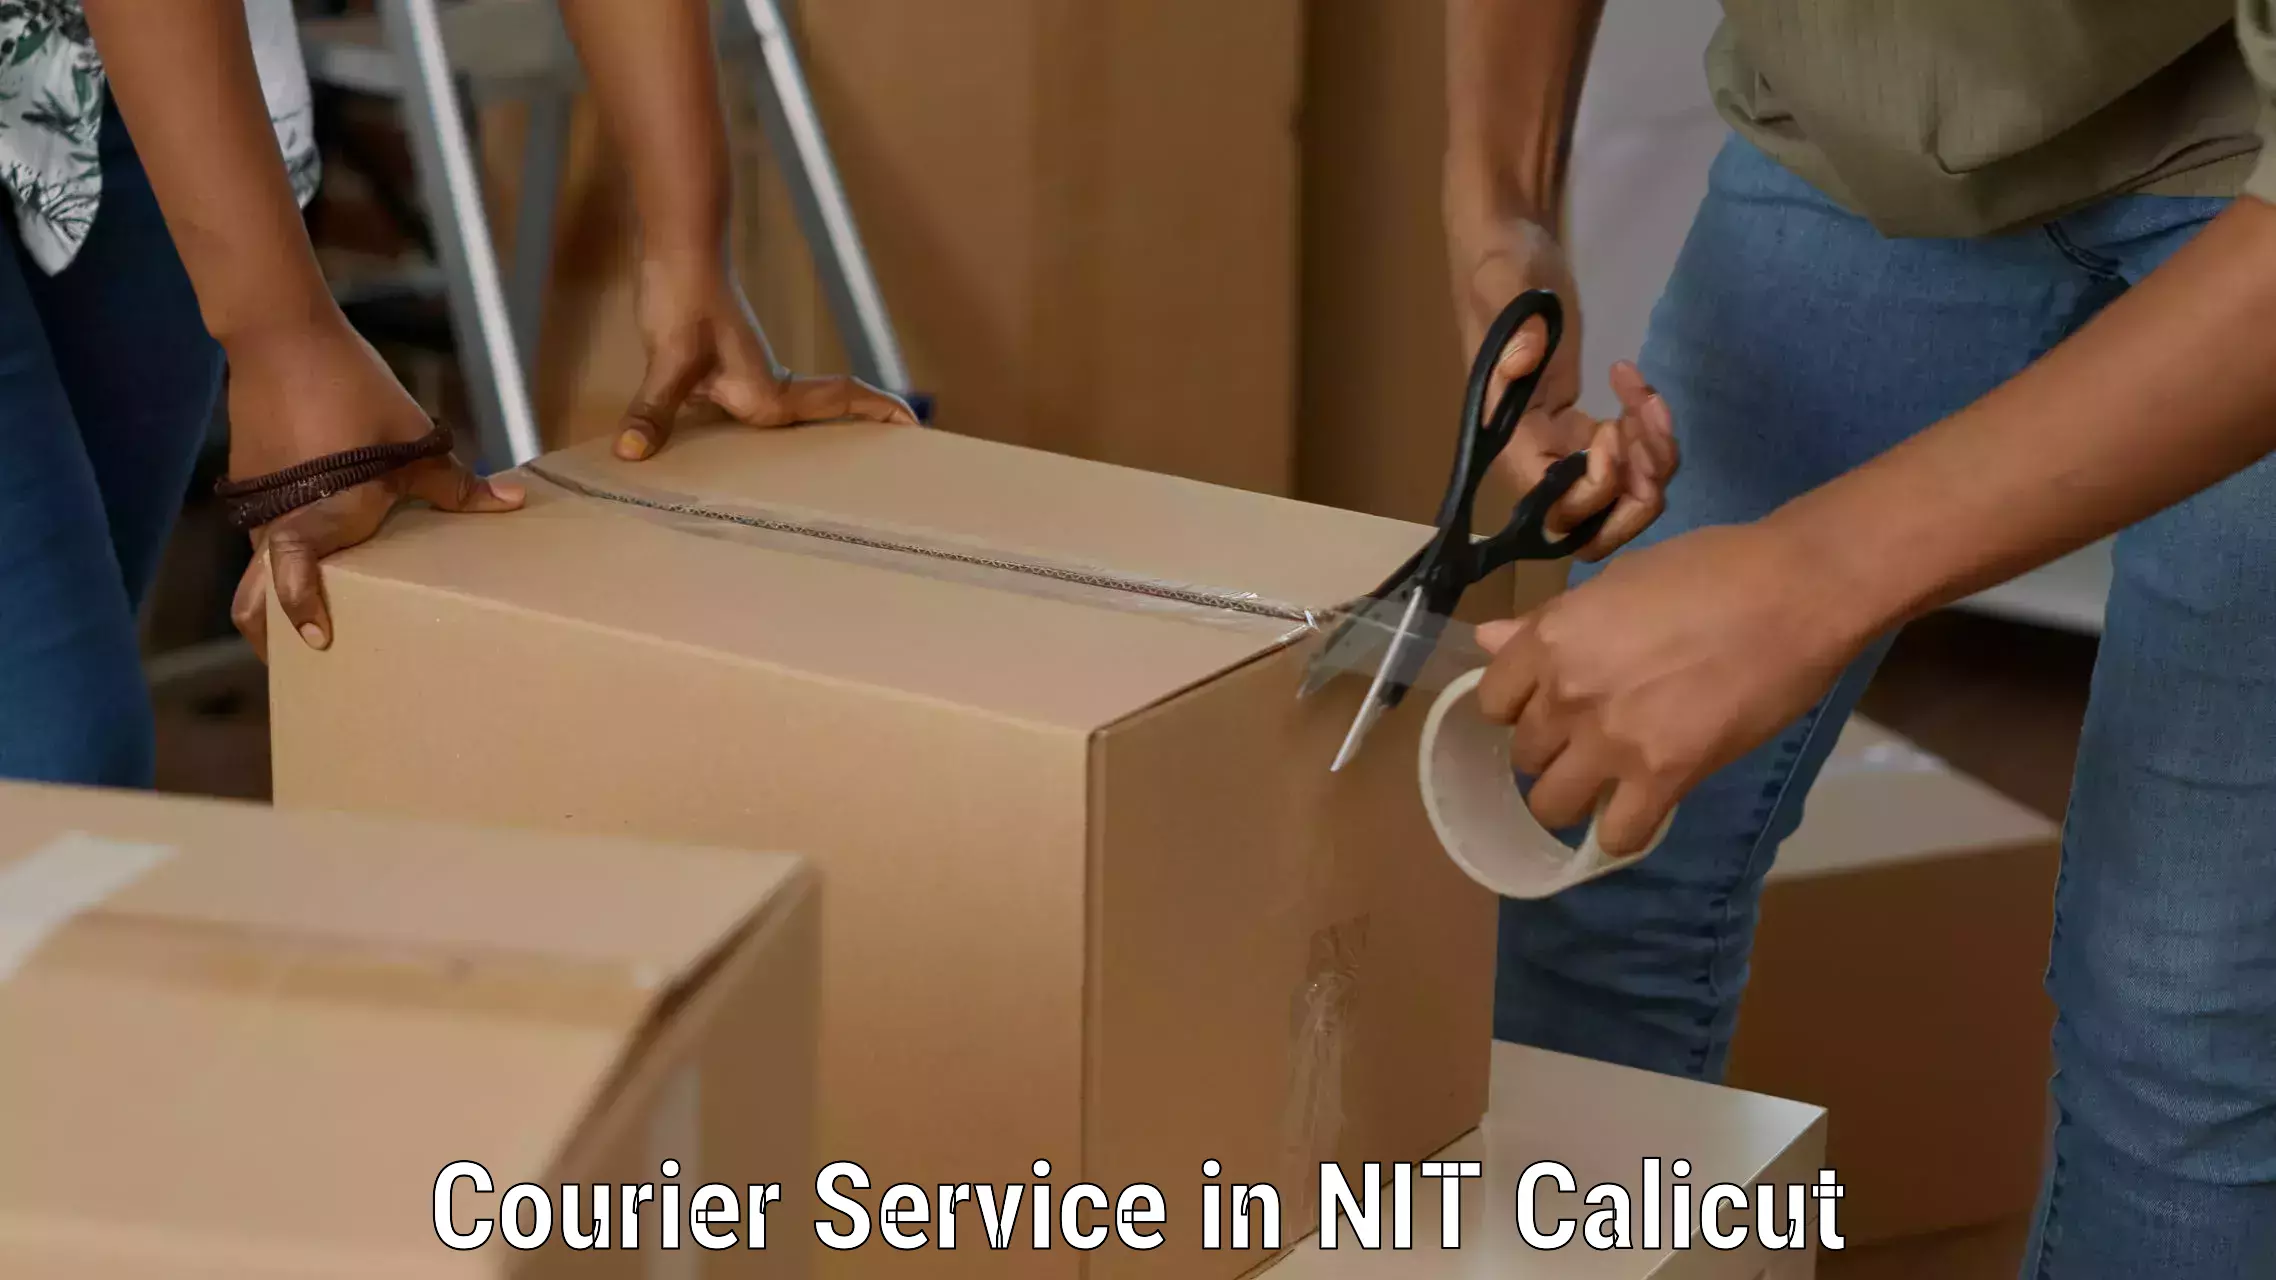 Efficient courier operations in NIT Calicut